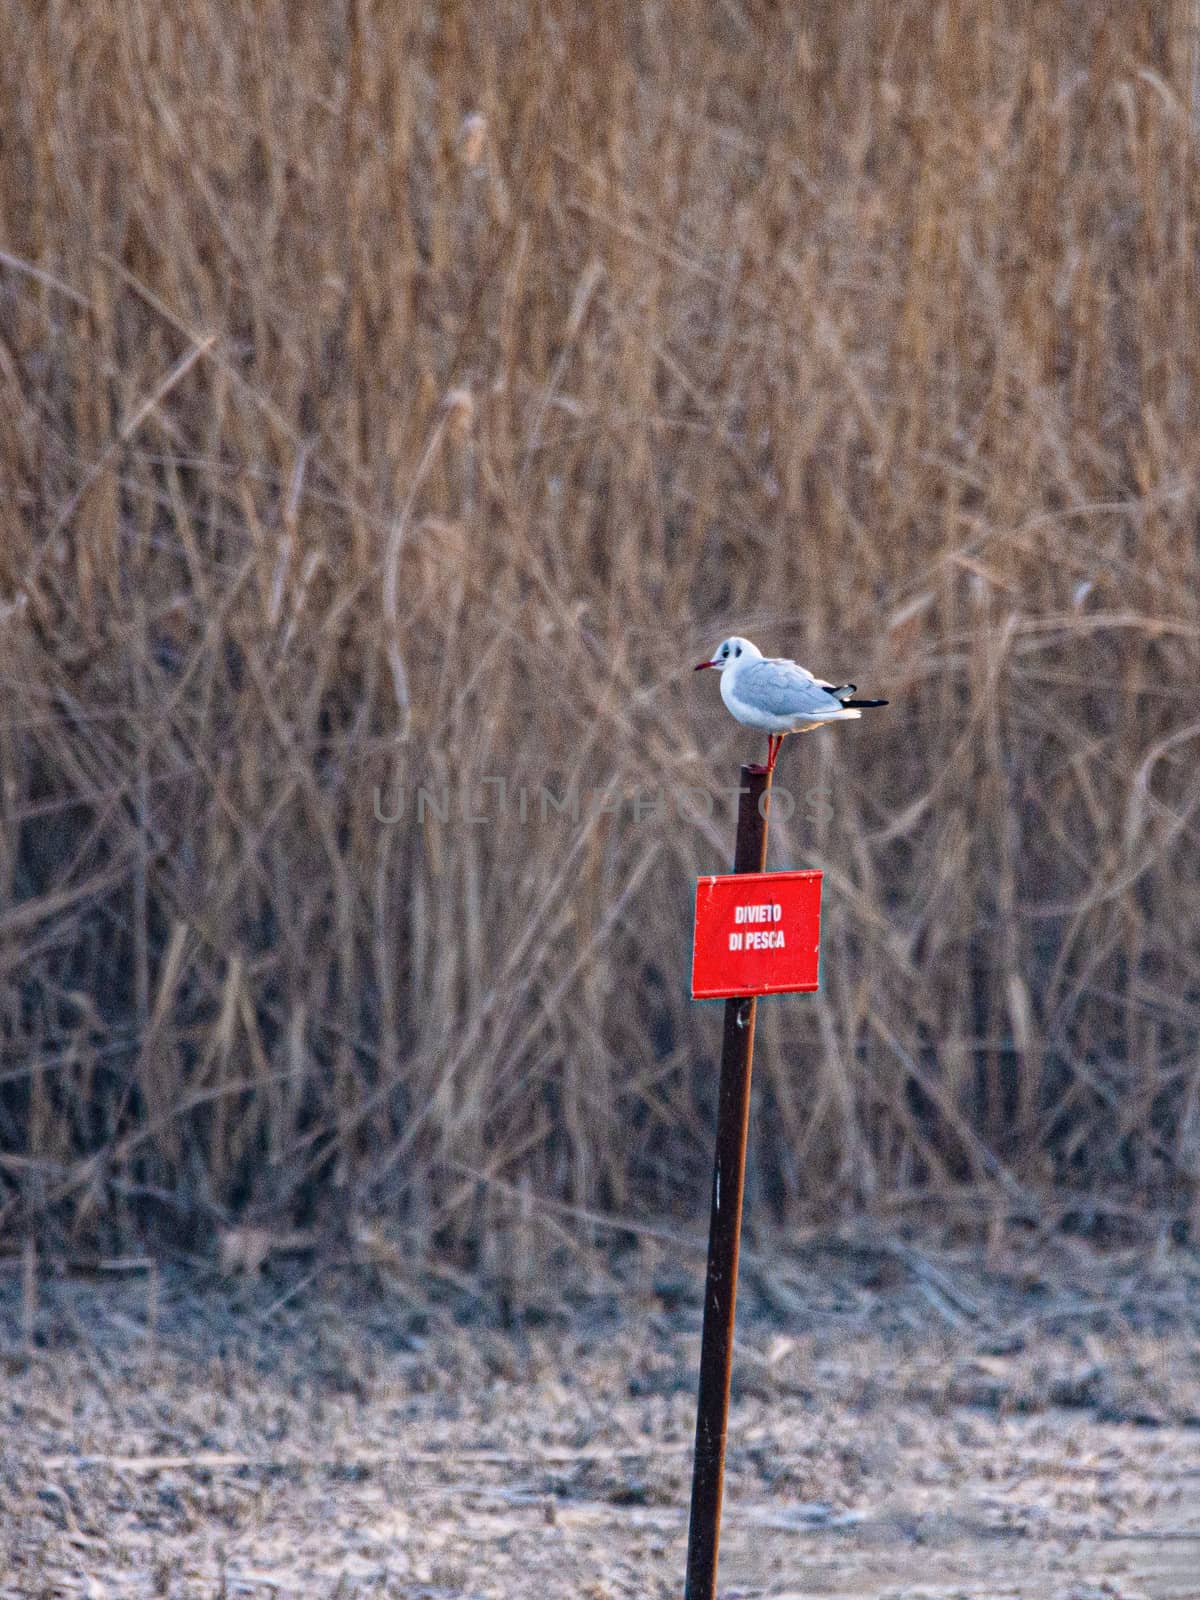 A seagull resting on a "fishing ban" signboard in a swamp in Ita by brambillasimone